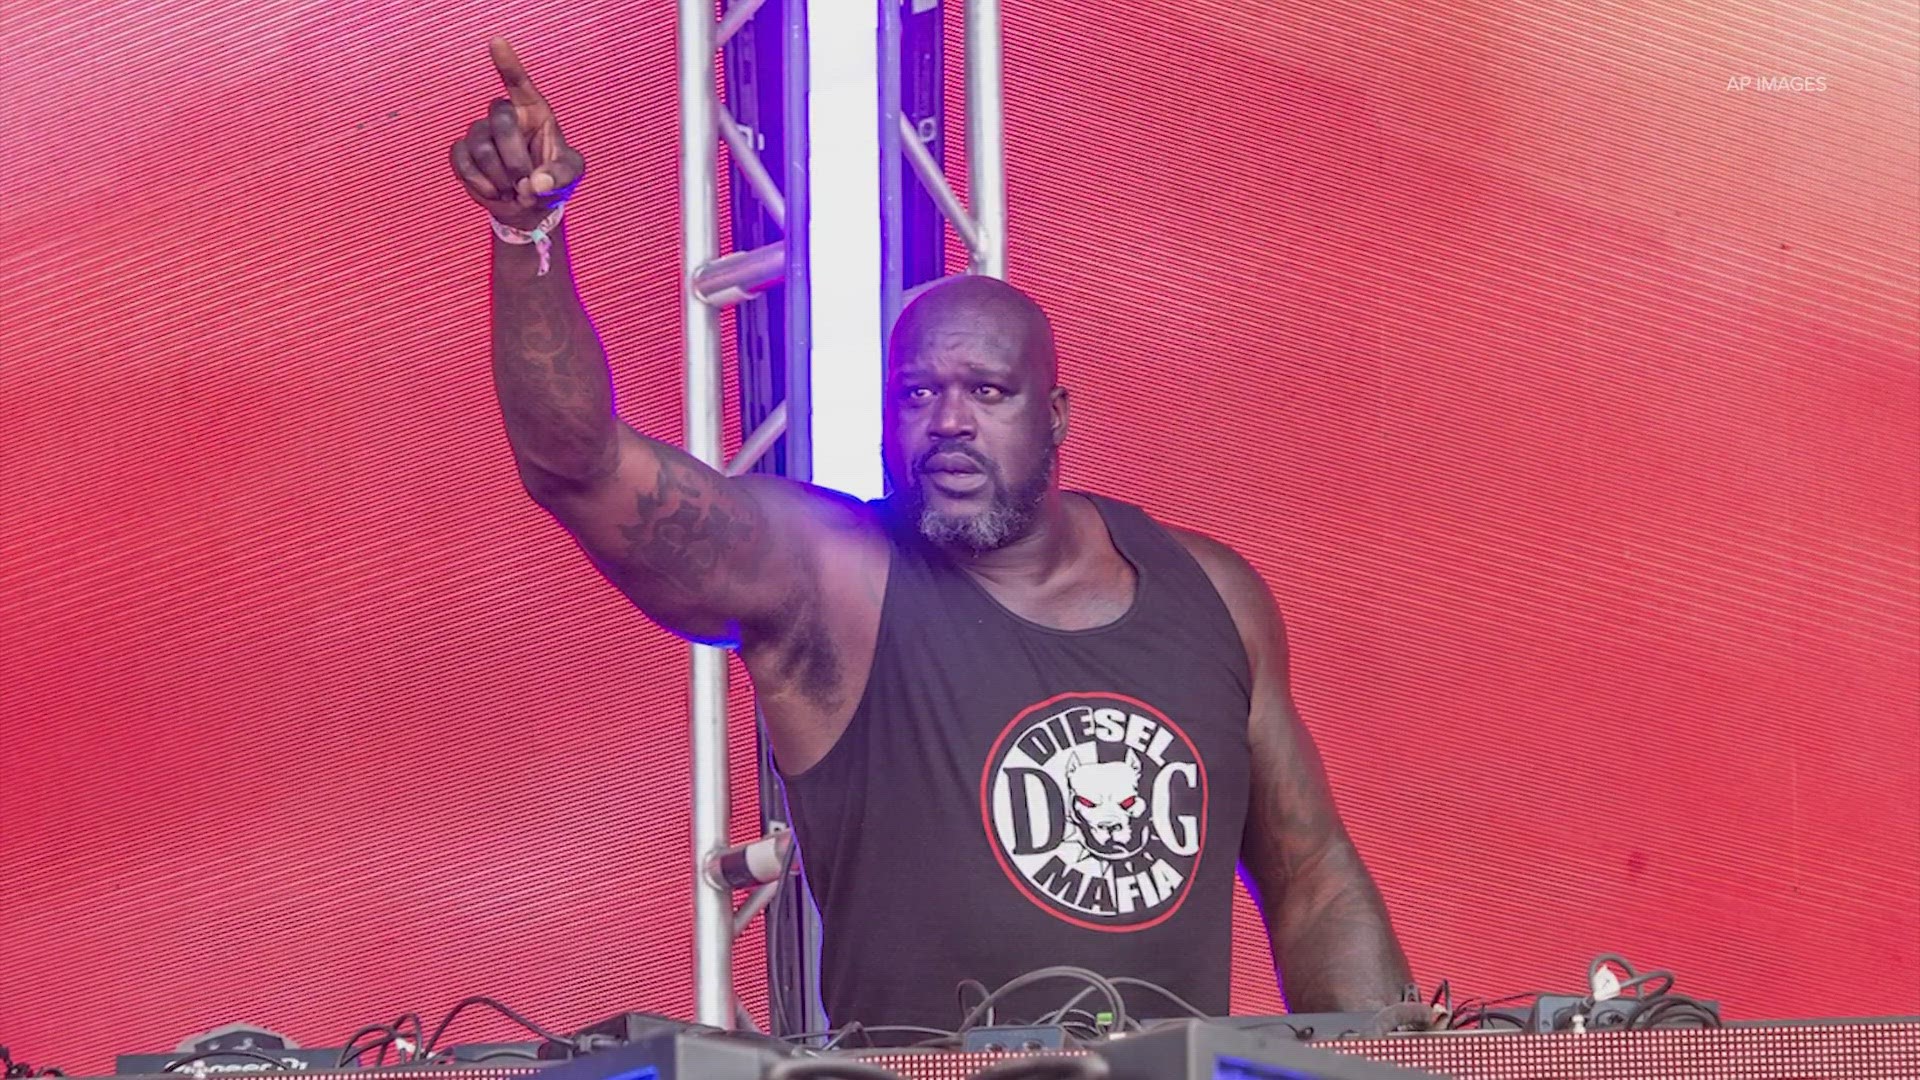 Shaquille O'Neal, aka DJ Diesel, said this will be the largest bass festival in Texas and will include two stages and at least a dozen bass and dubstep acts.